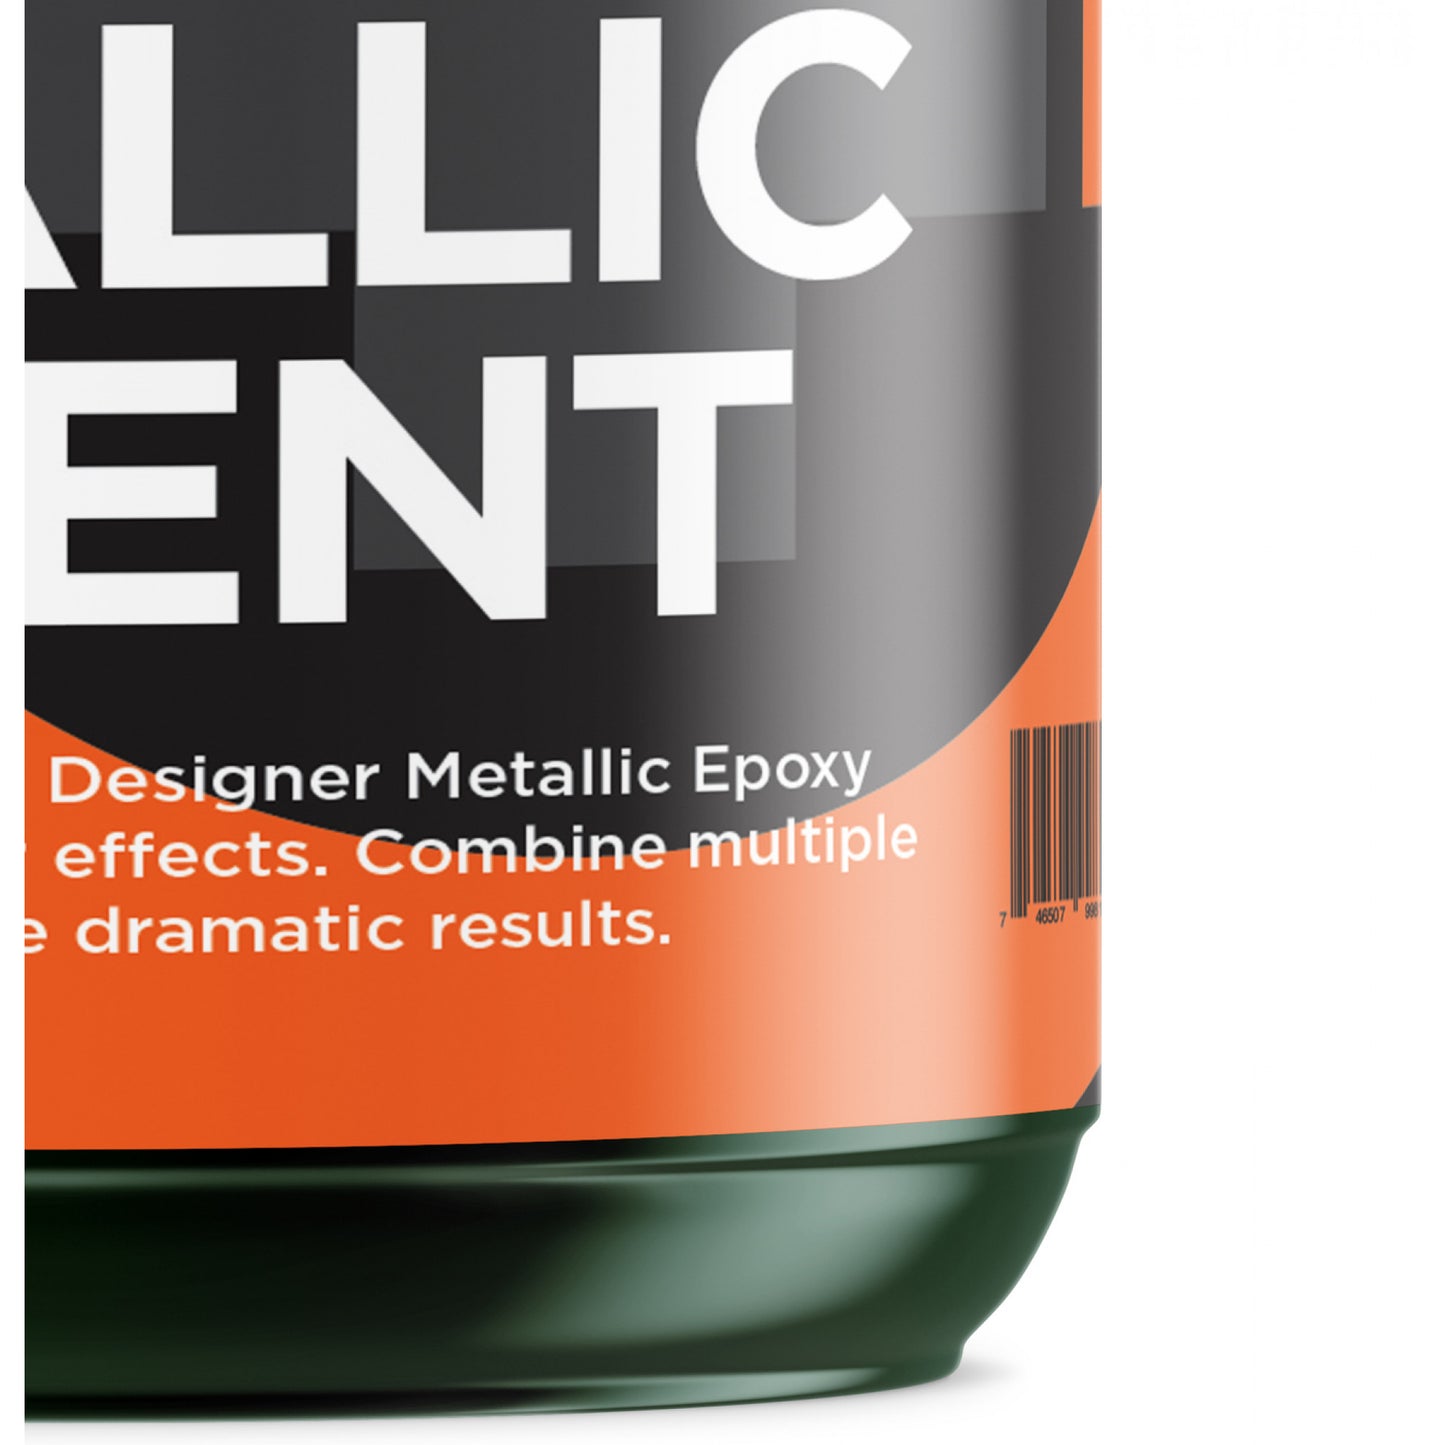 Customize with Style: Forest Green Metallic Epoxy Pigment for unique designs